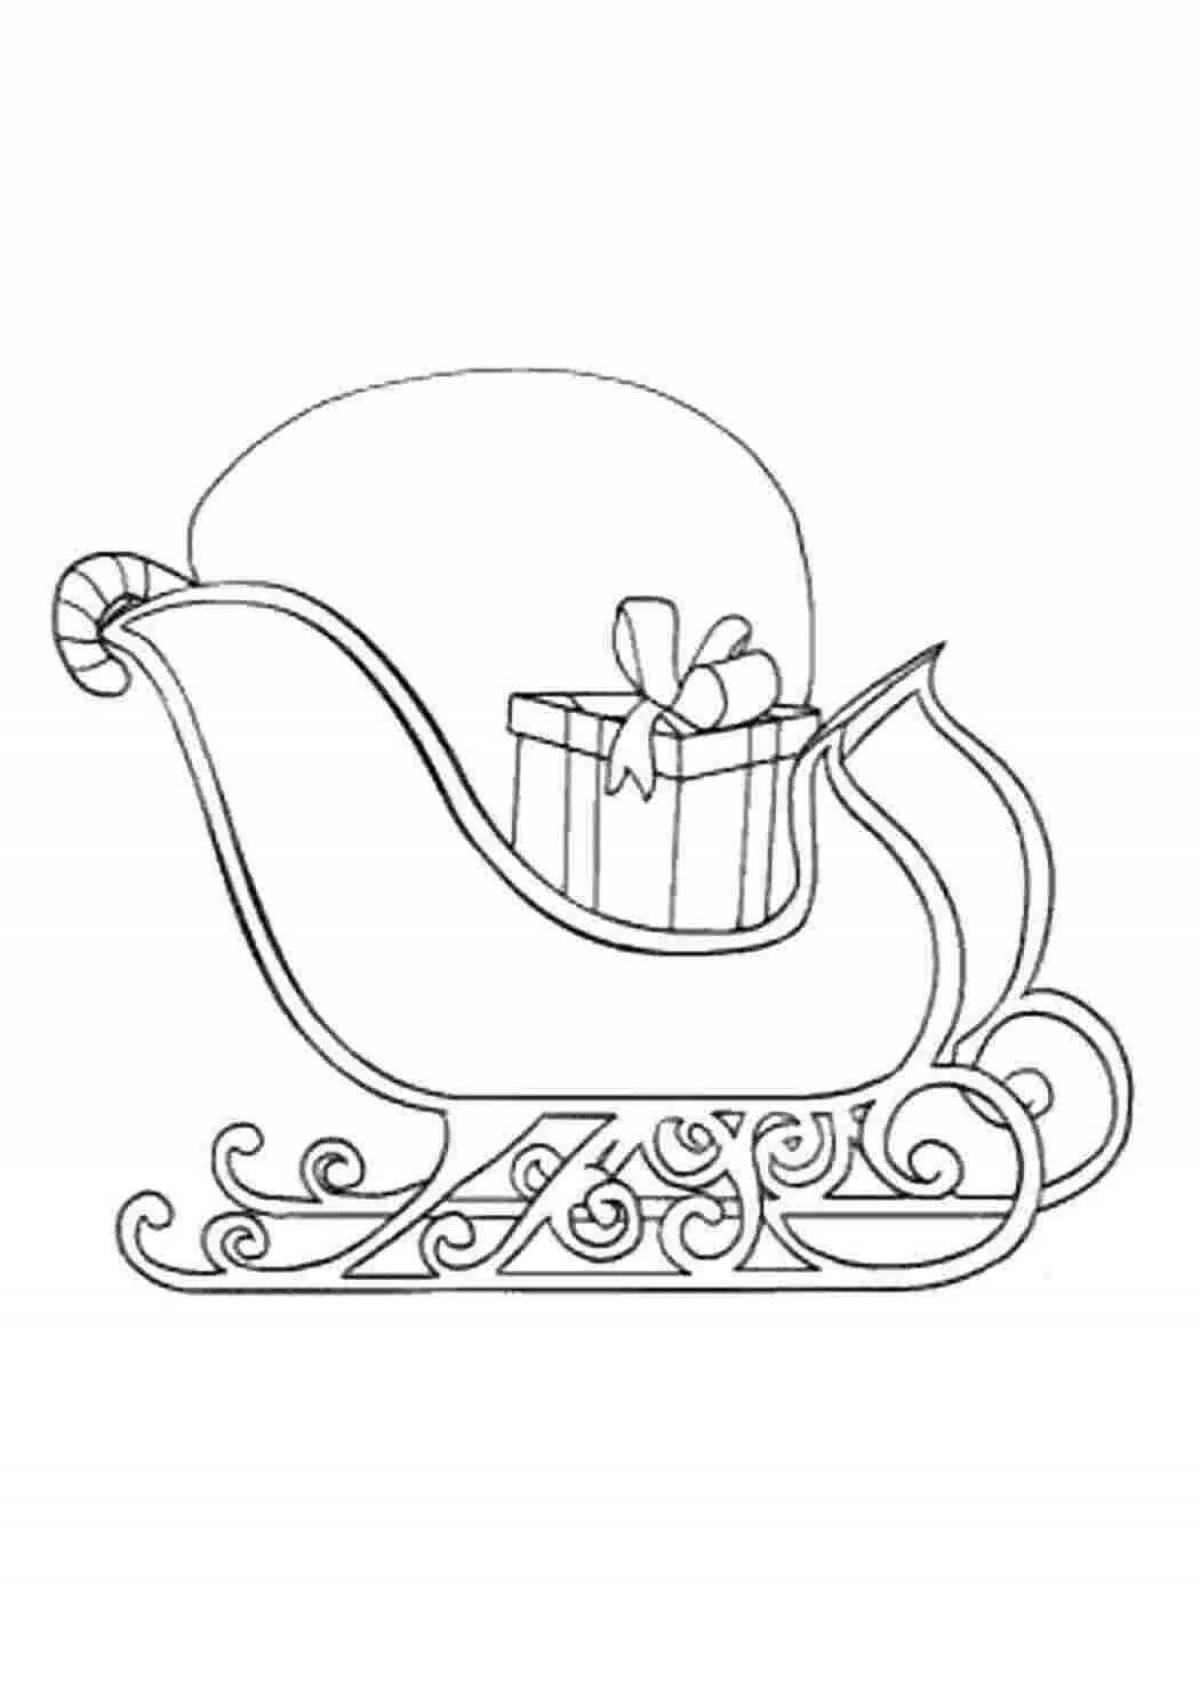 Amazing sleigh coloring pages